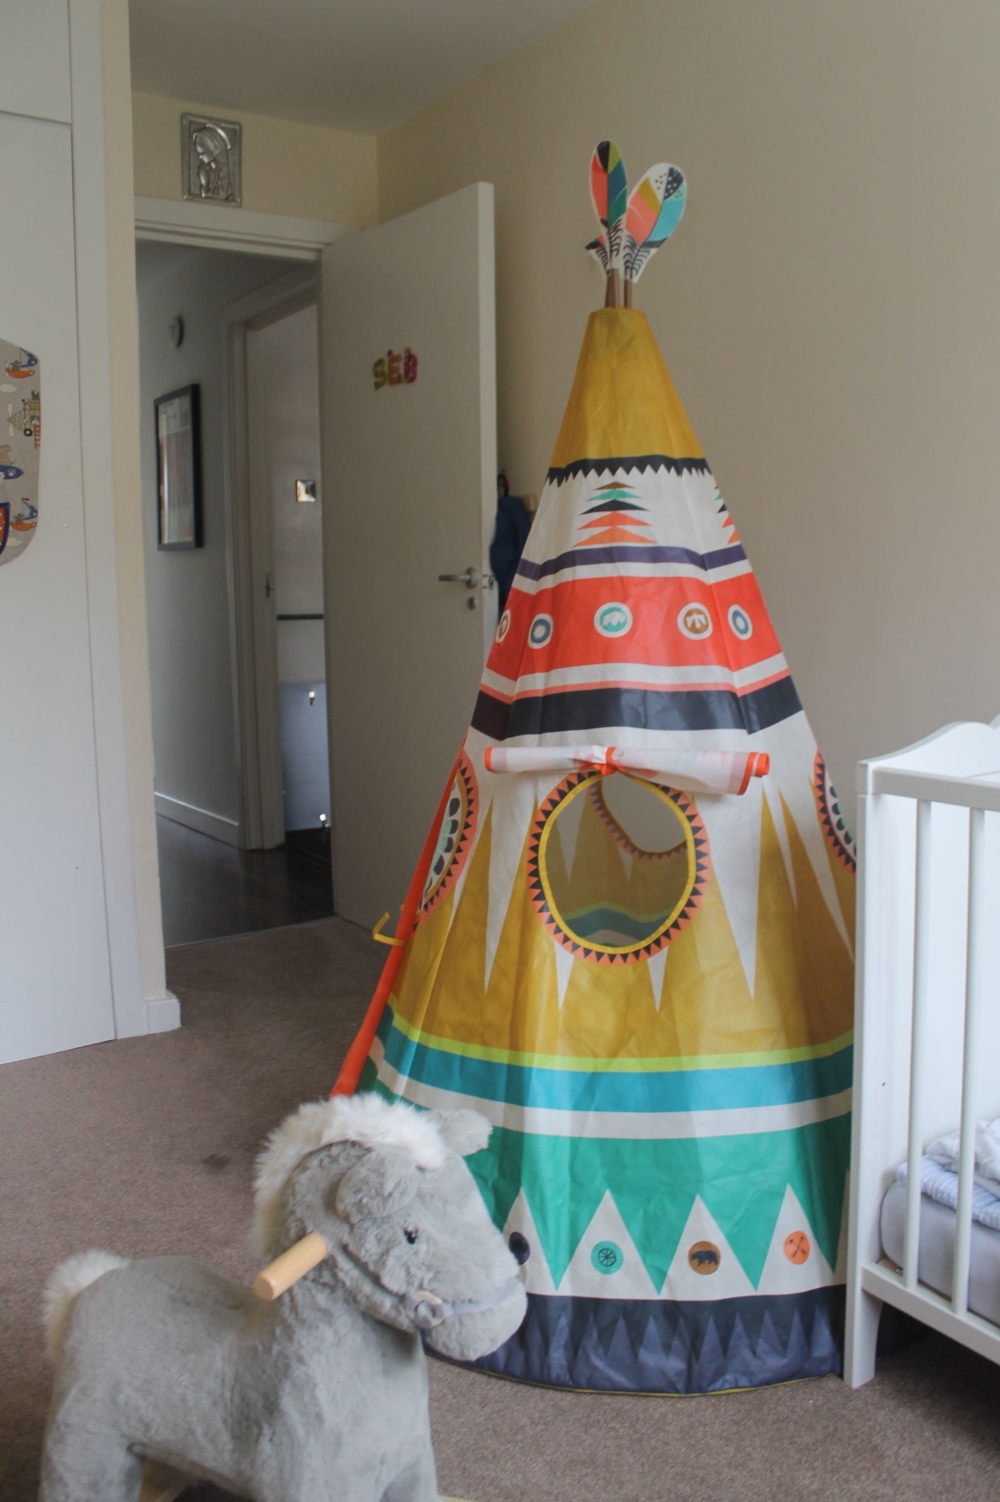 Image of a tipi in the toddlers bedroom 